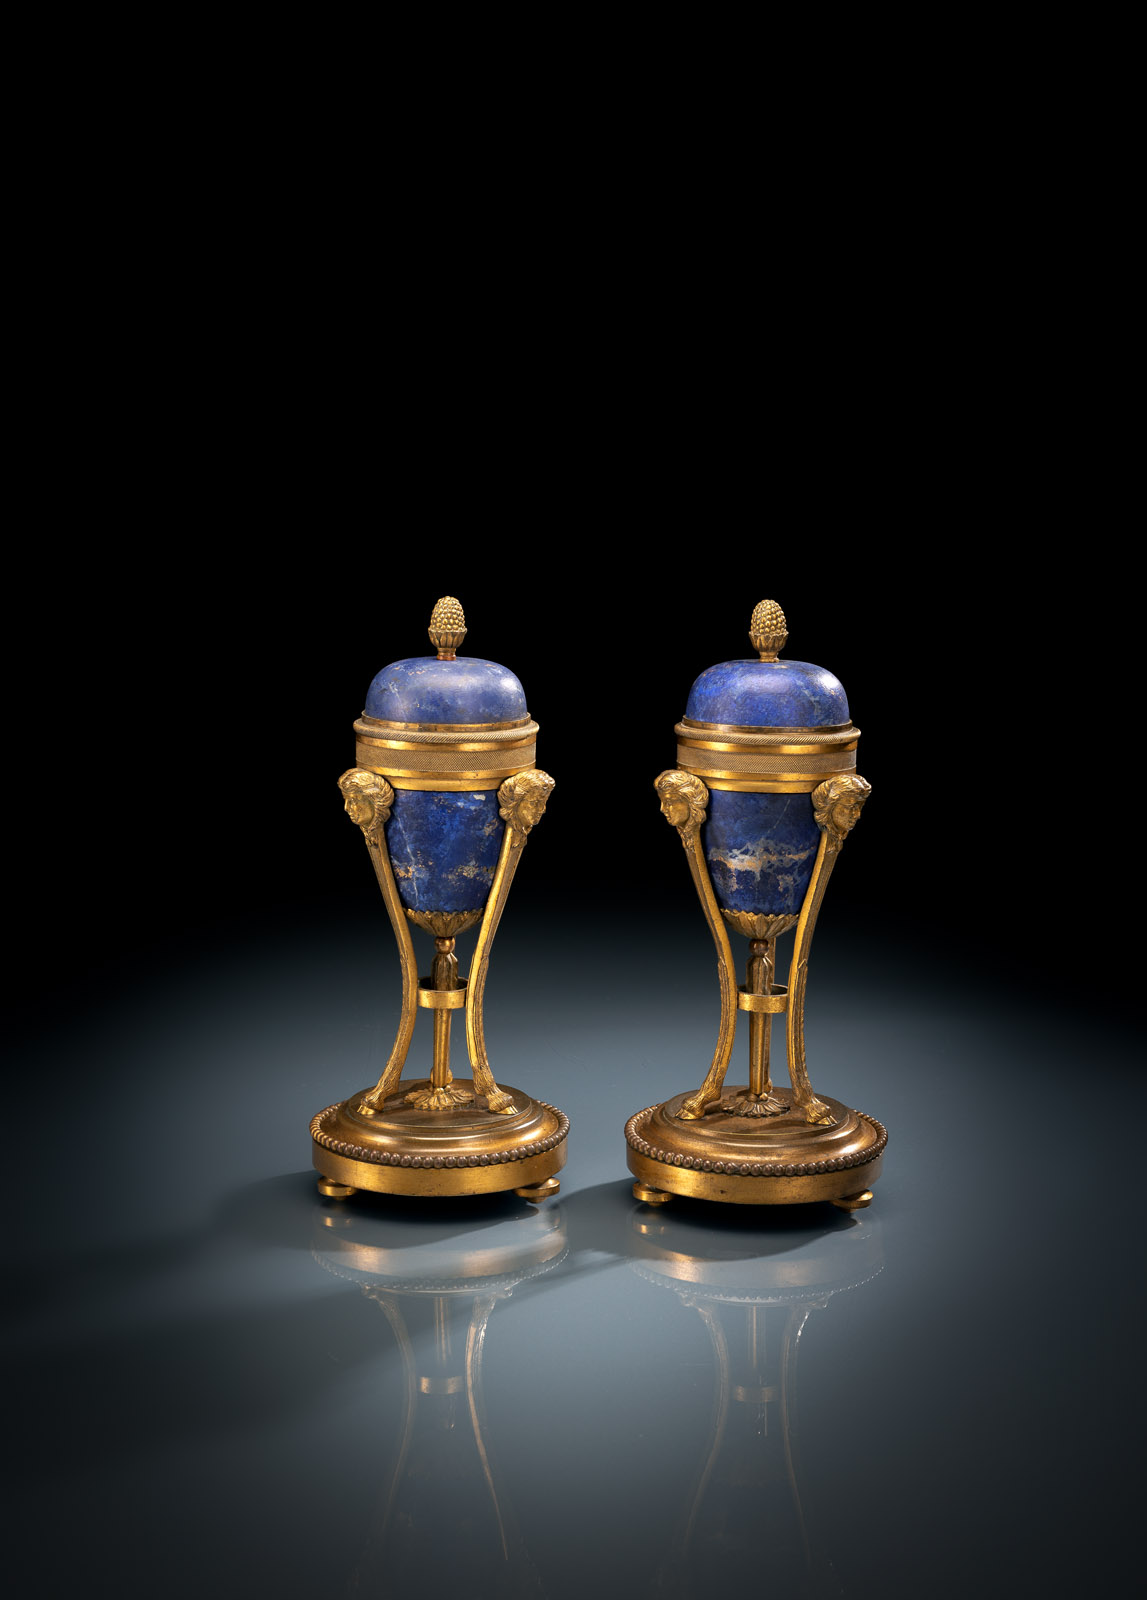 <b>A PAIR OF FRENCH EMPIRE LAIPS-LAZULI PATTERN GILT BRONZE CASSOLETTES</b>